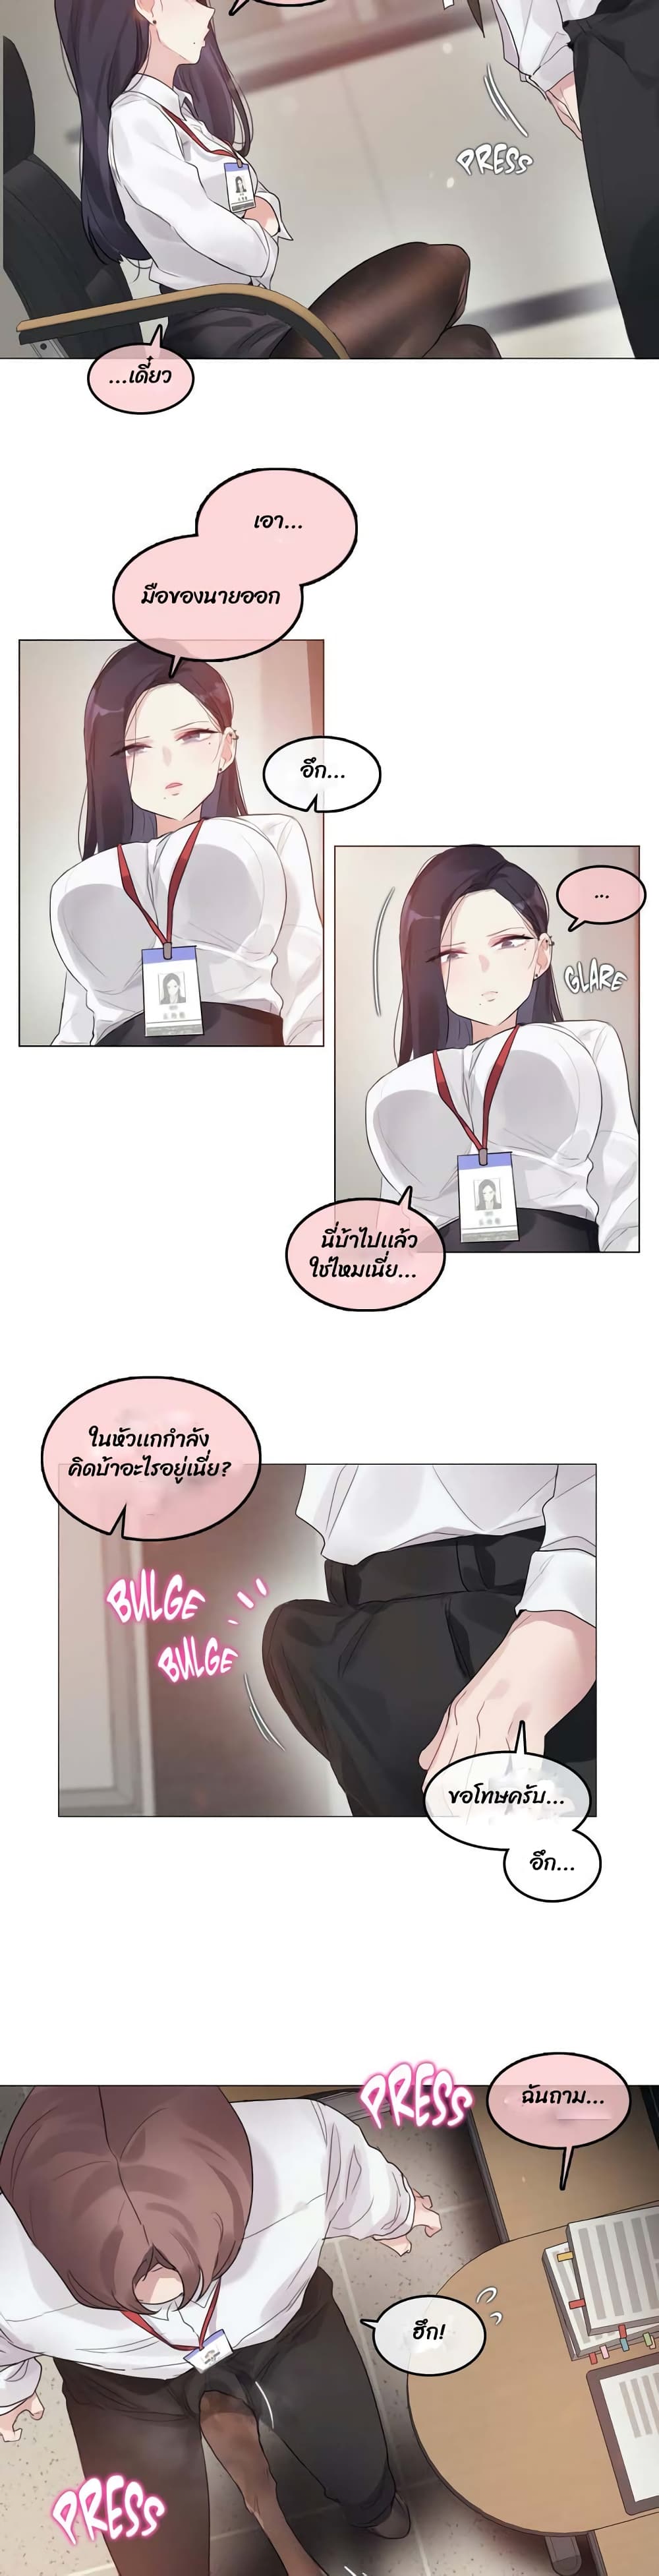 A Pervert's Daily Life 92 (3)